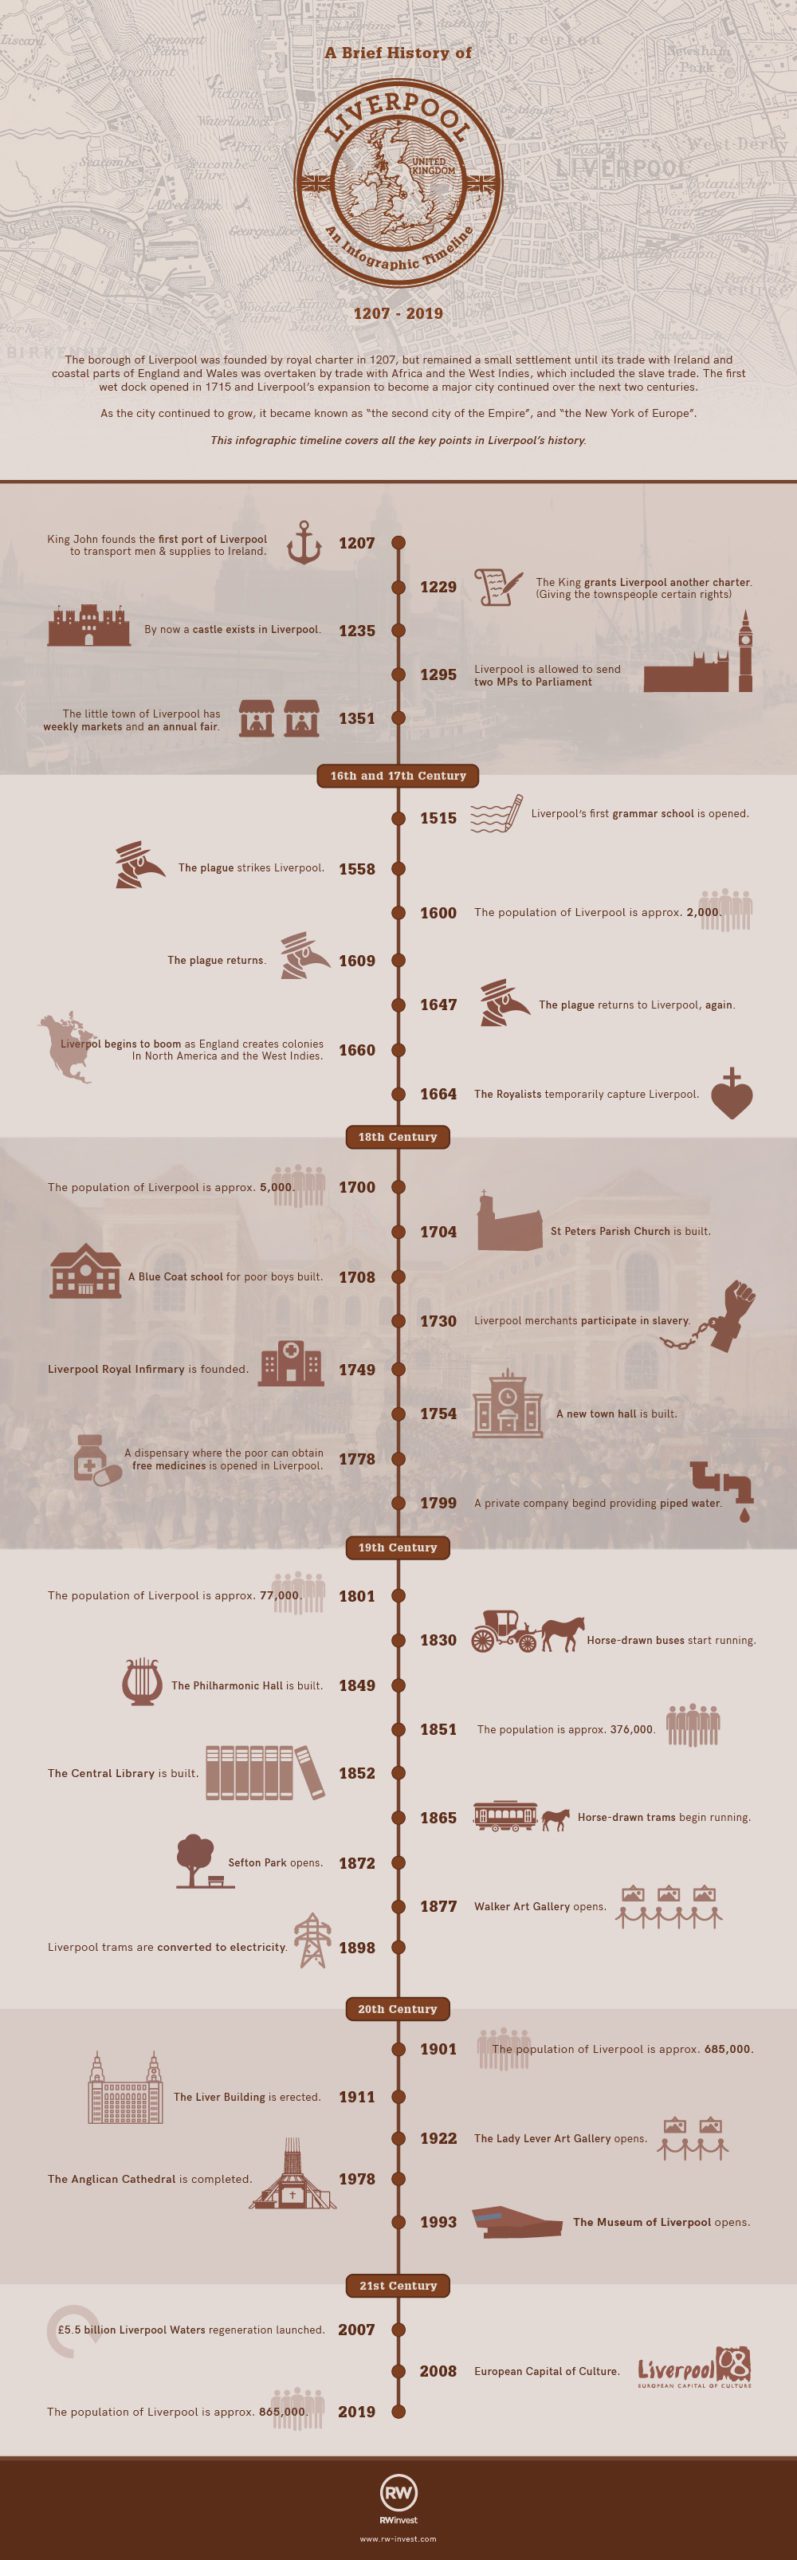 An Infographic Timeline of Liverpool’s History infographic